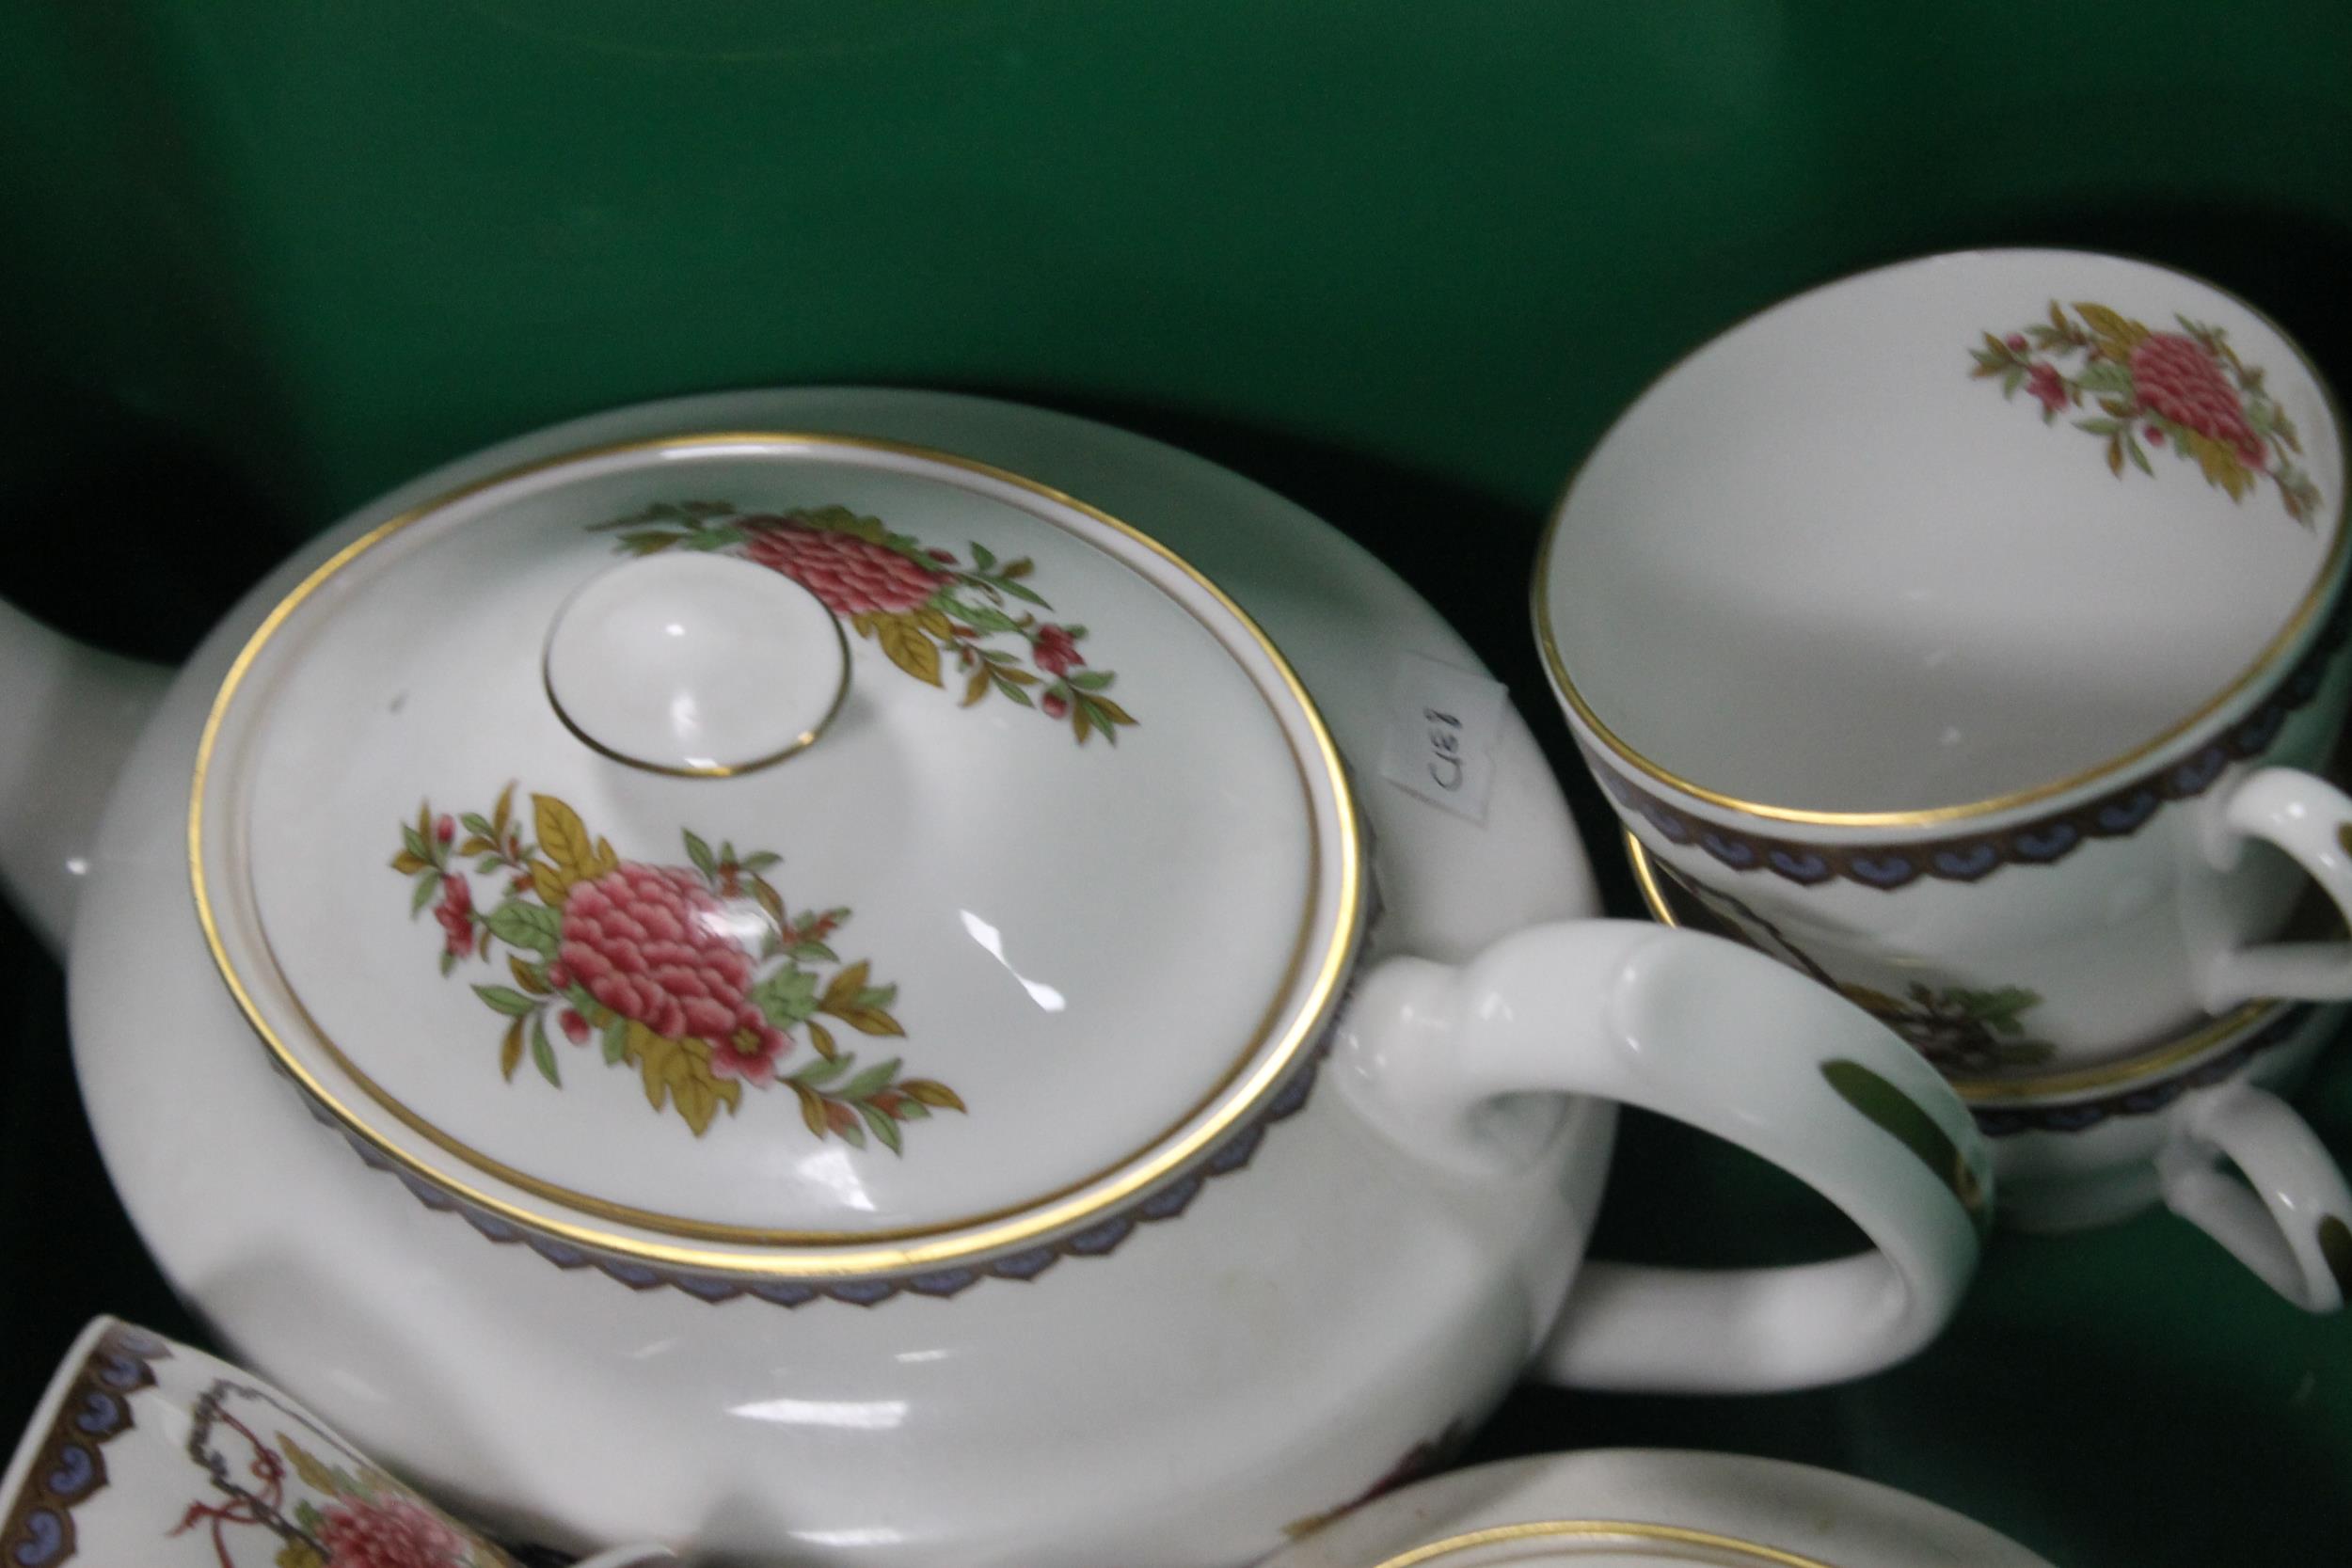 A SPODE TEASET IN "CHINESE BASKET" PATTERN INCLUDING TEAPOT - Image 2 of 3